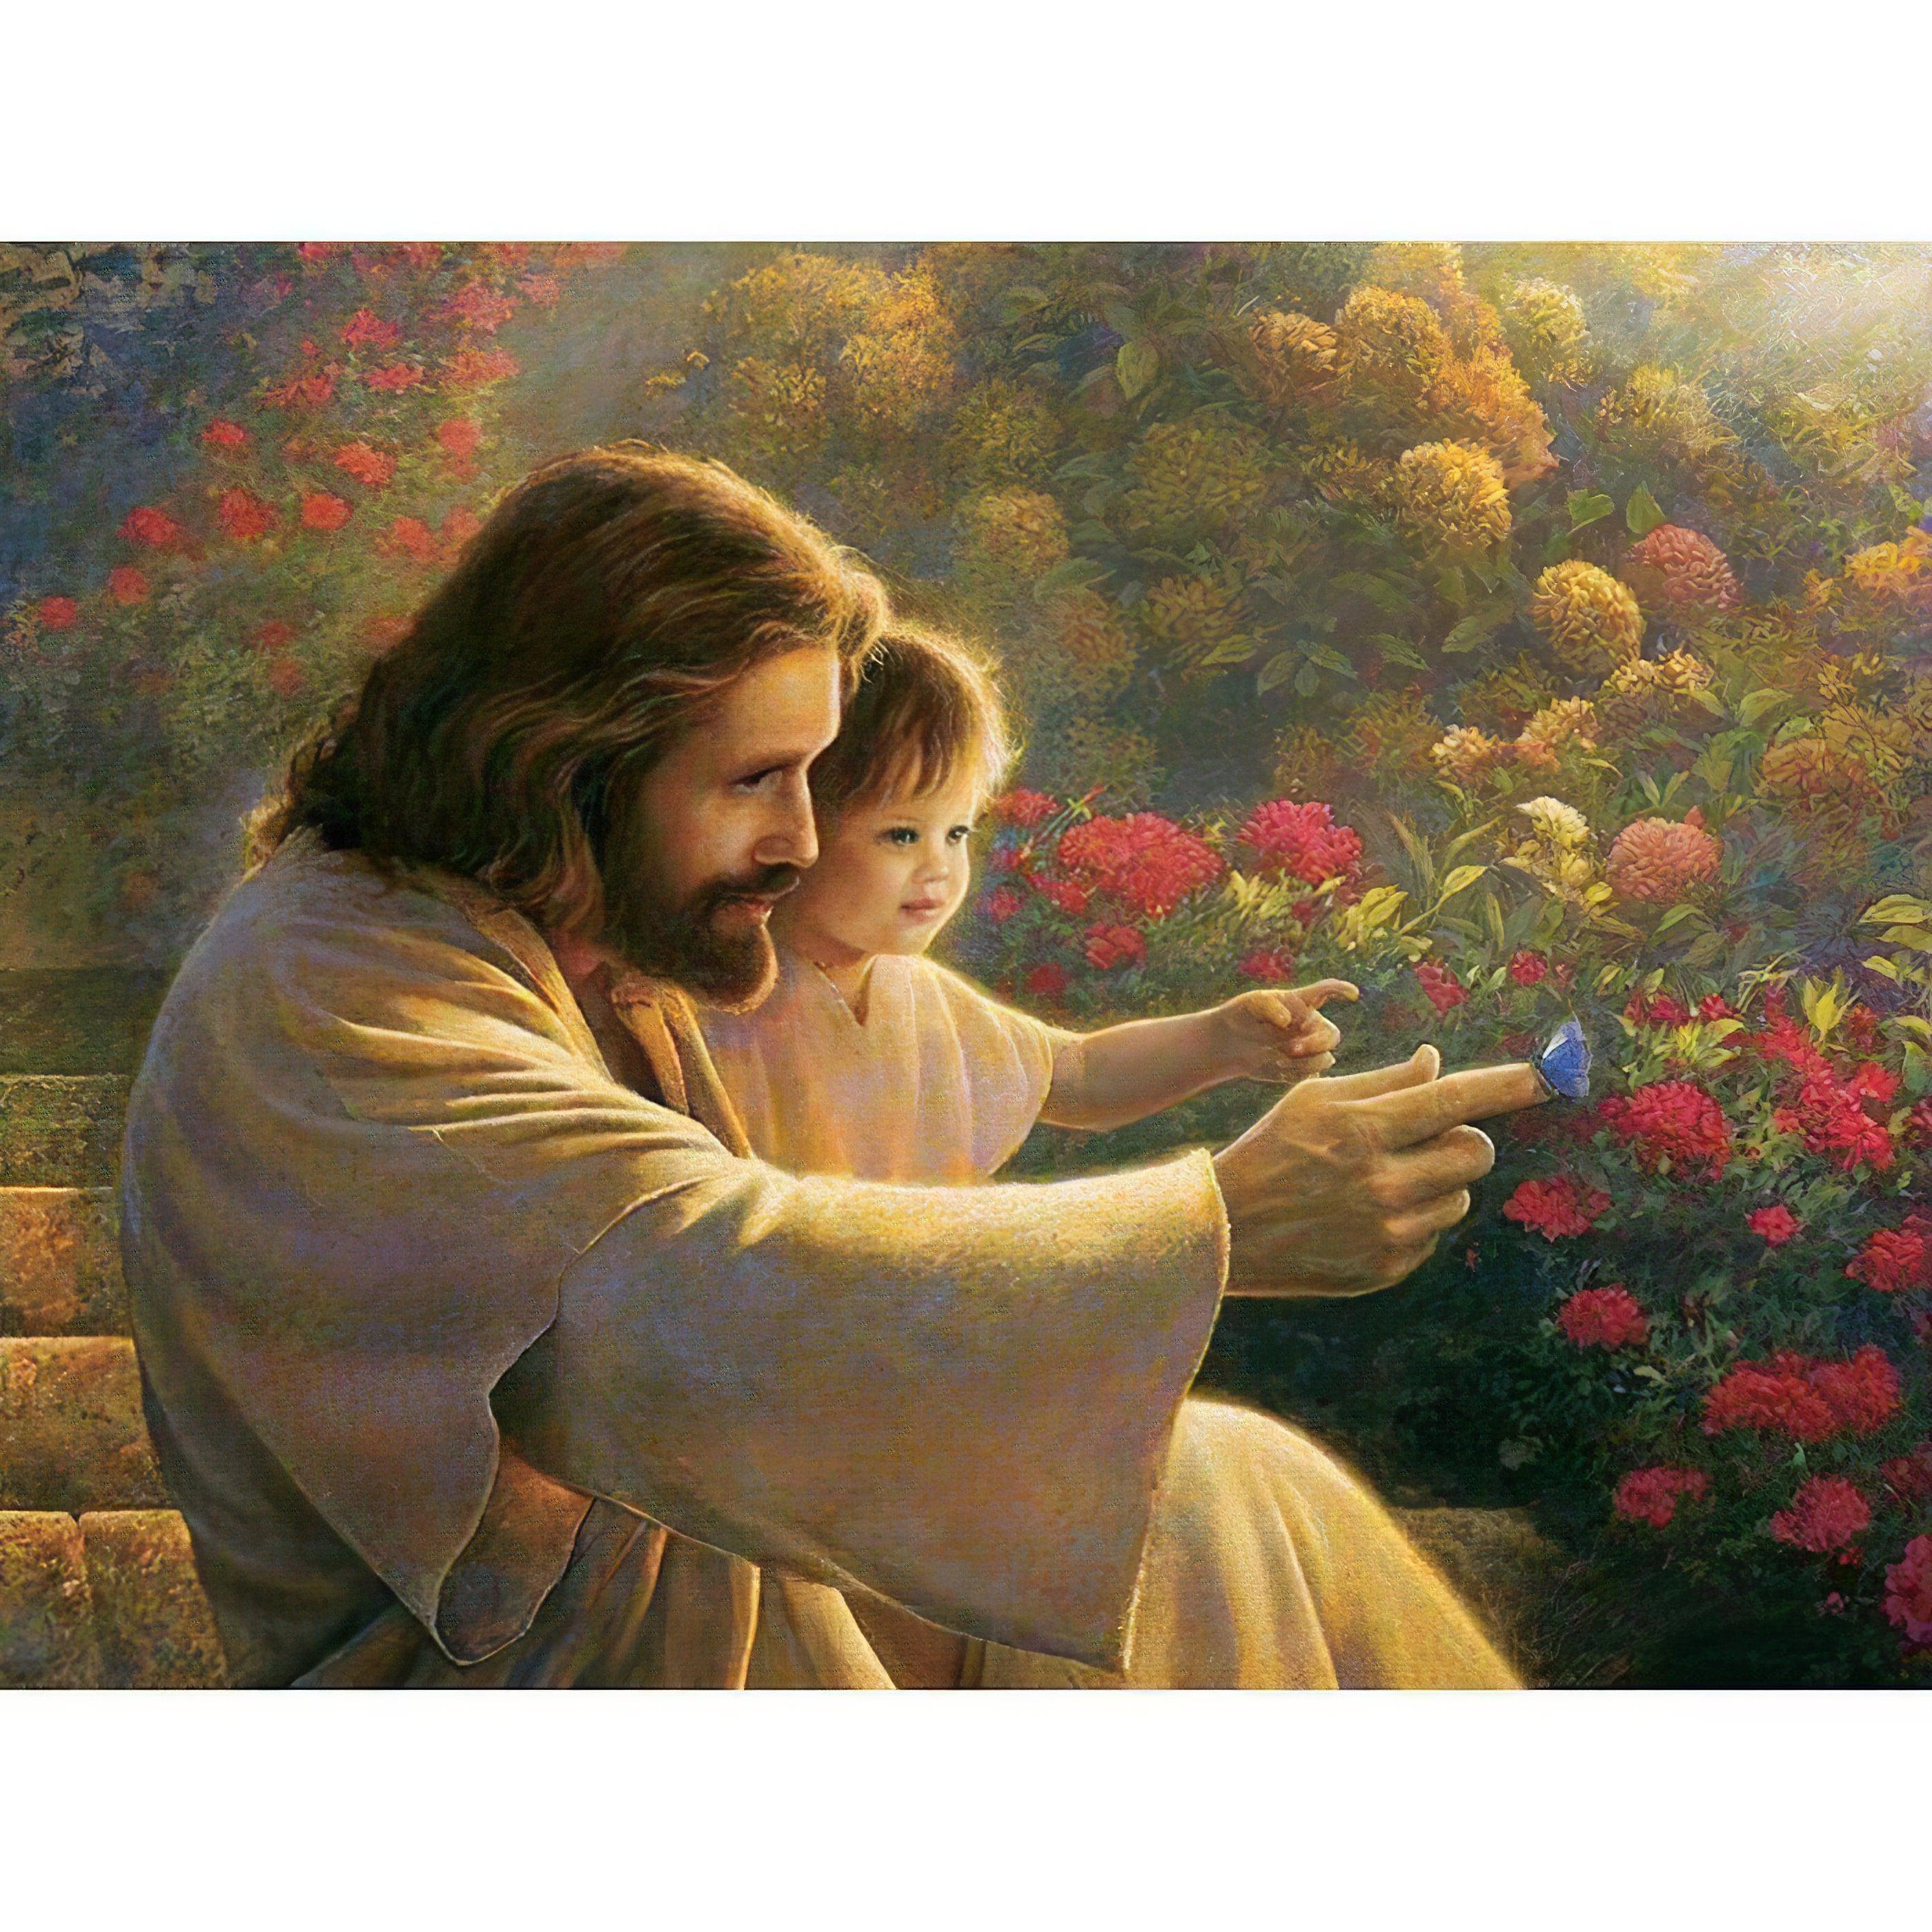 Feel divine warmth with Jesus and Baby amidst flowers. Jesus And Baby With Flowers - Diamondartlove